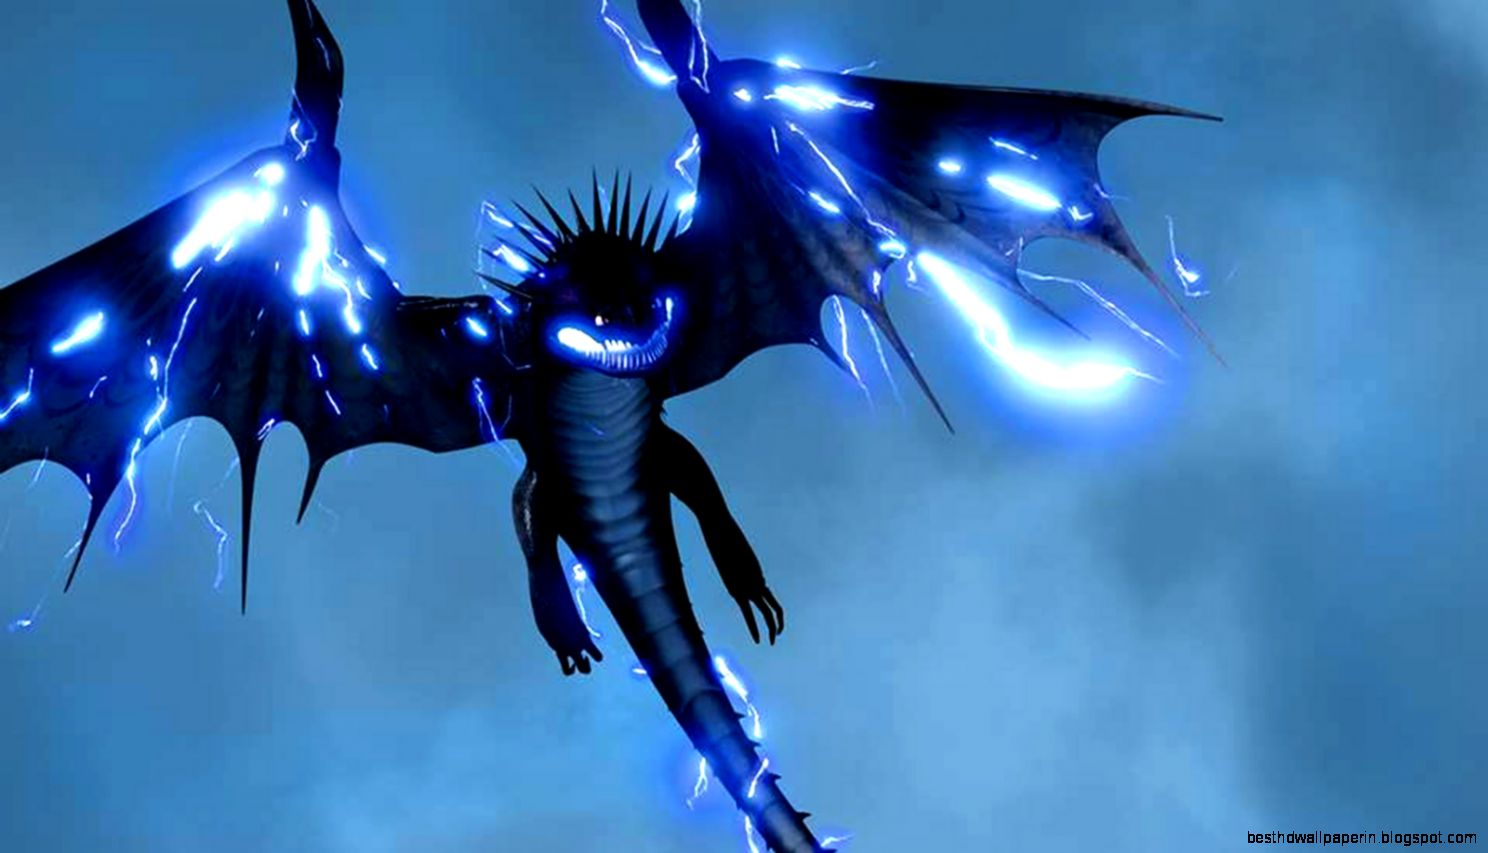 How To Train Your Dragon 2 Wallpaper Toothless | Best HD Wallpapers